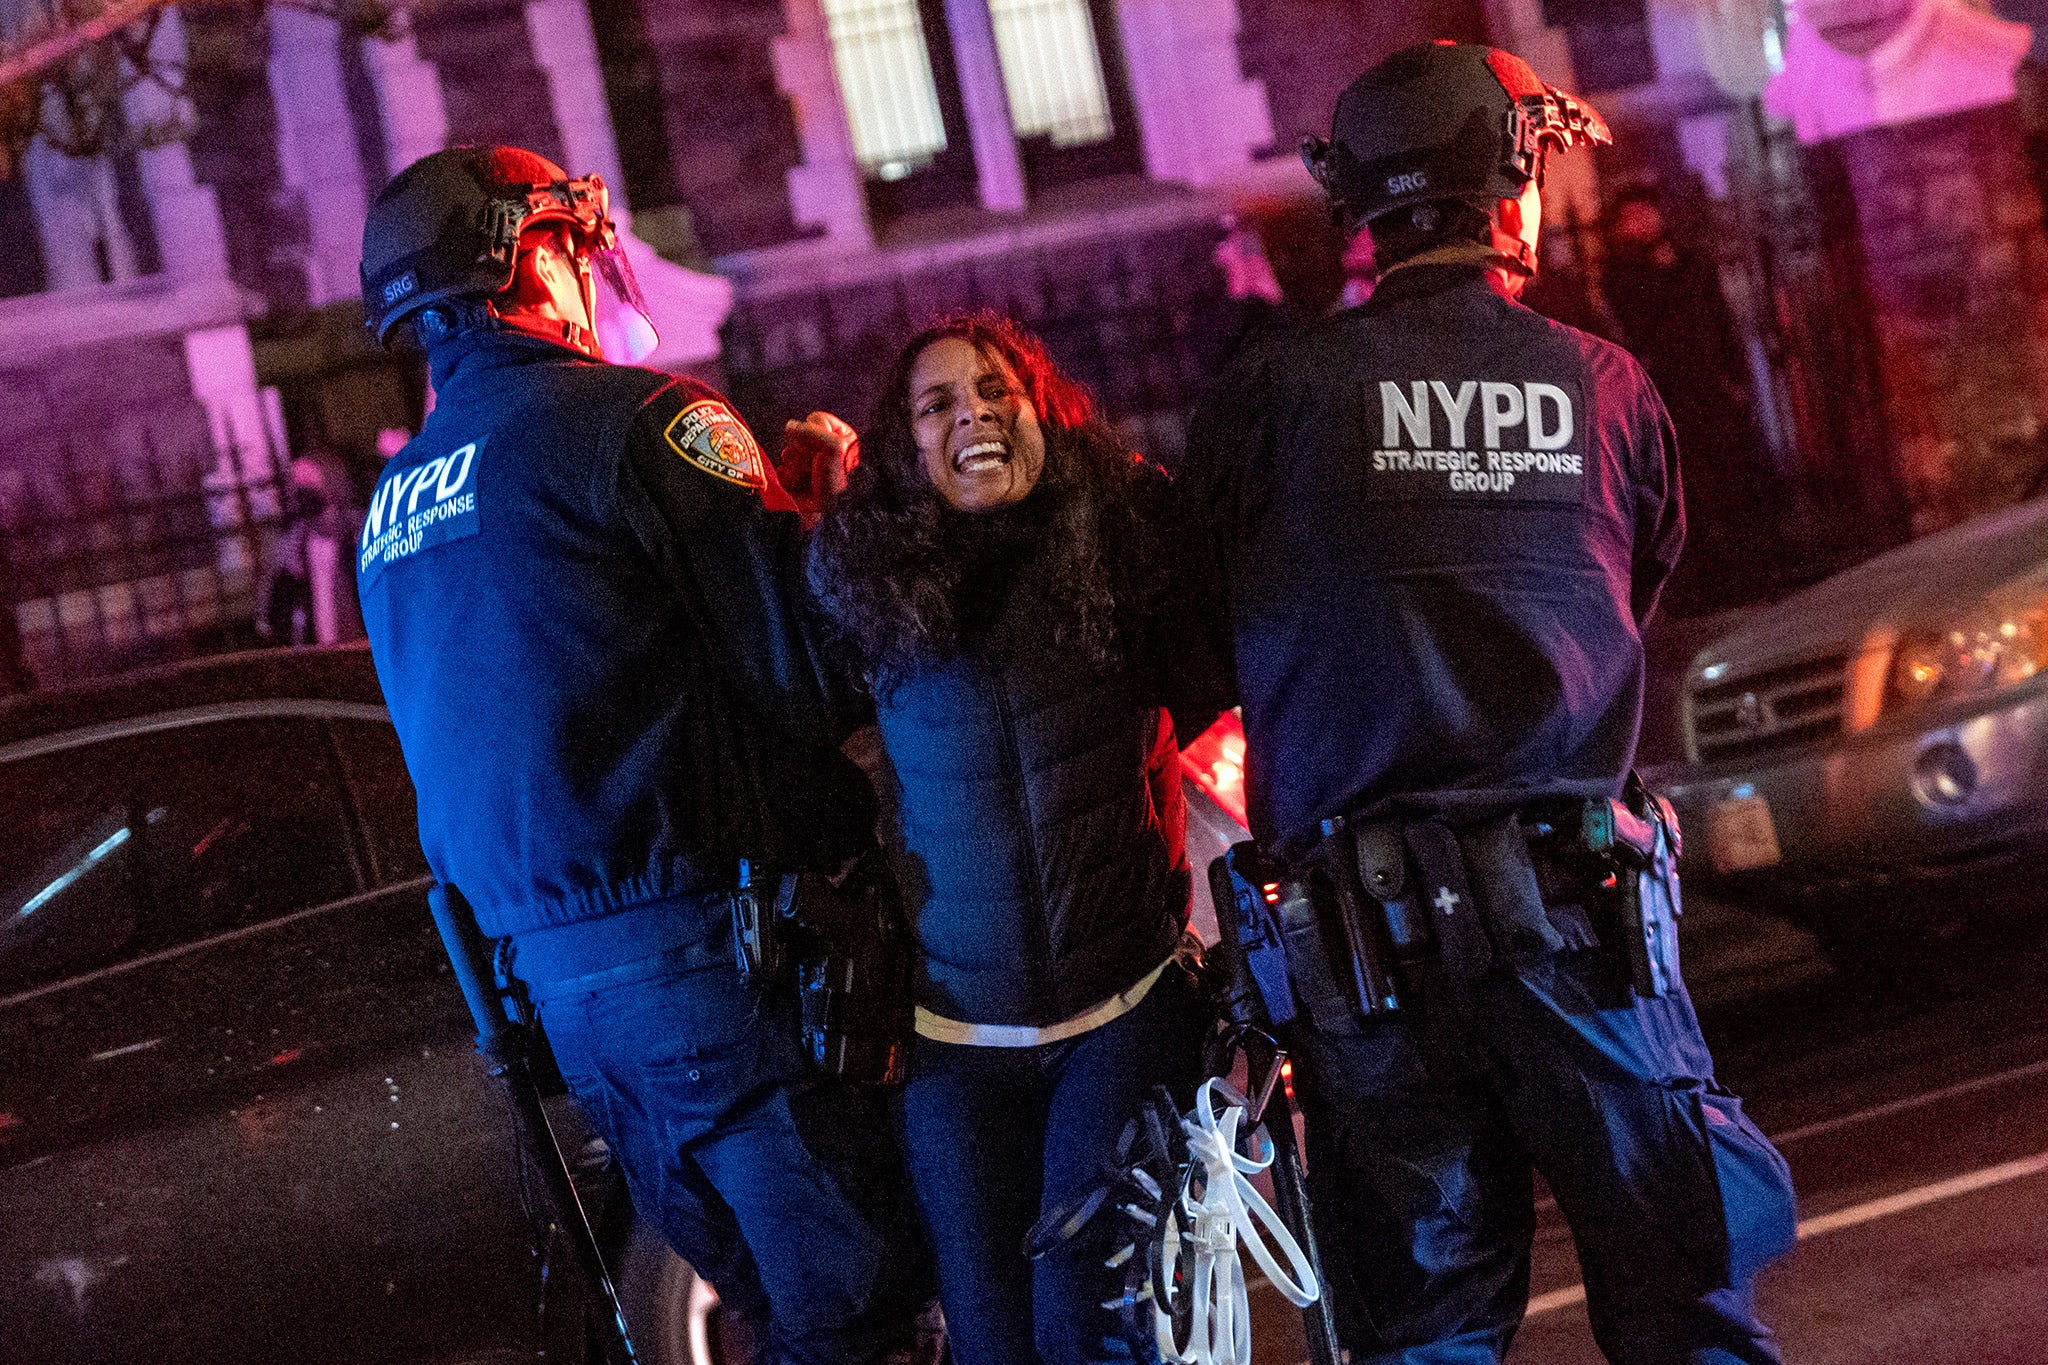 Police arrest a protester during demonstrations at The City College Of New York